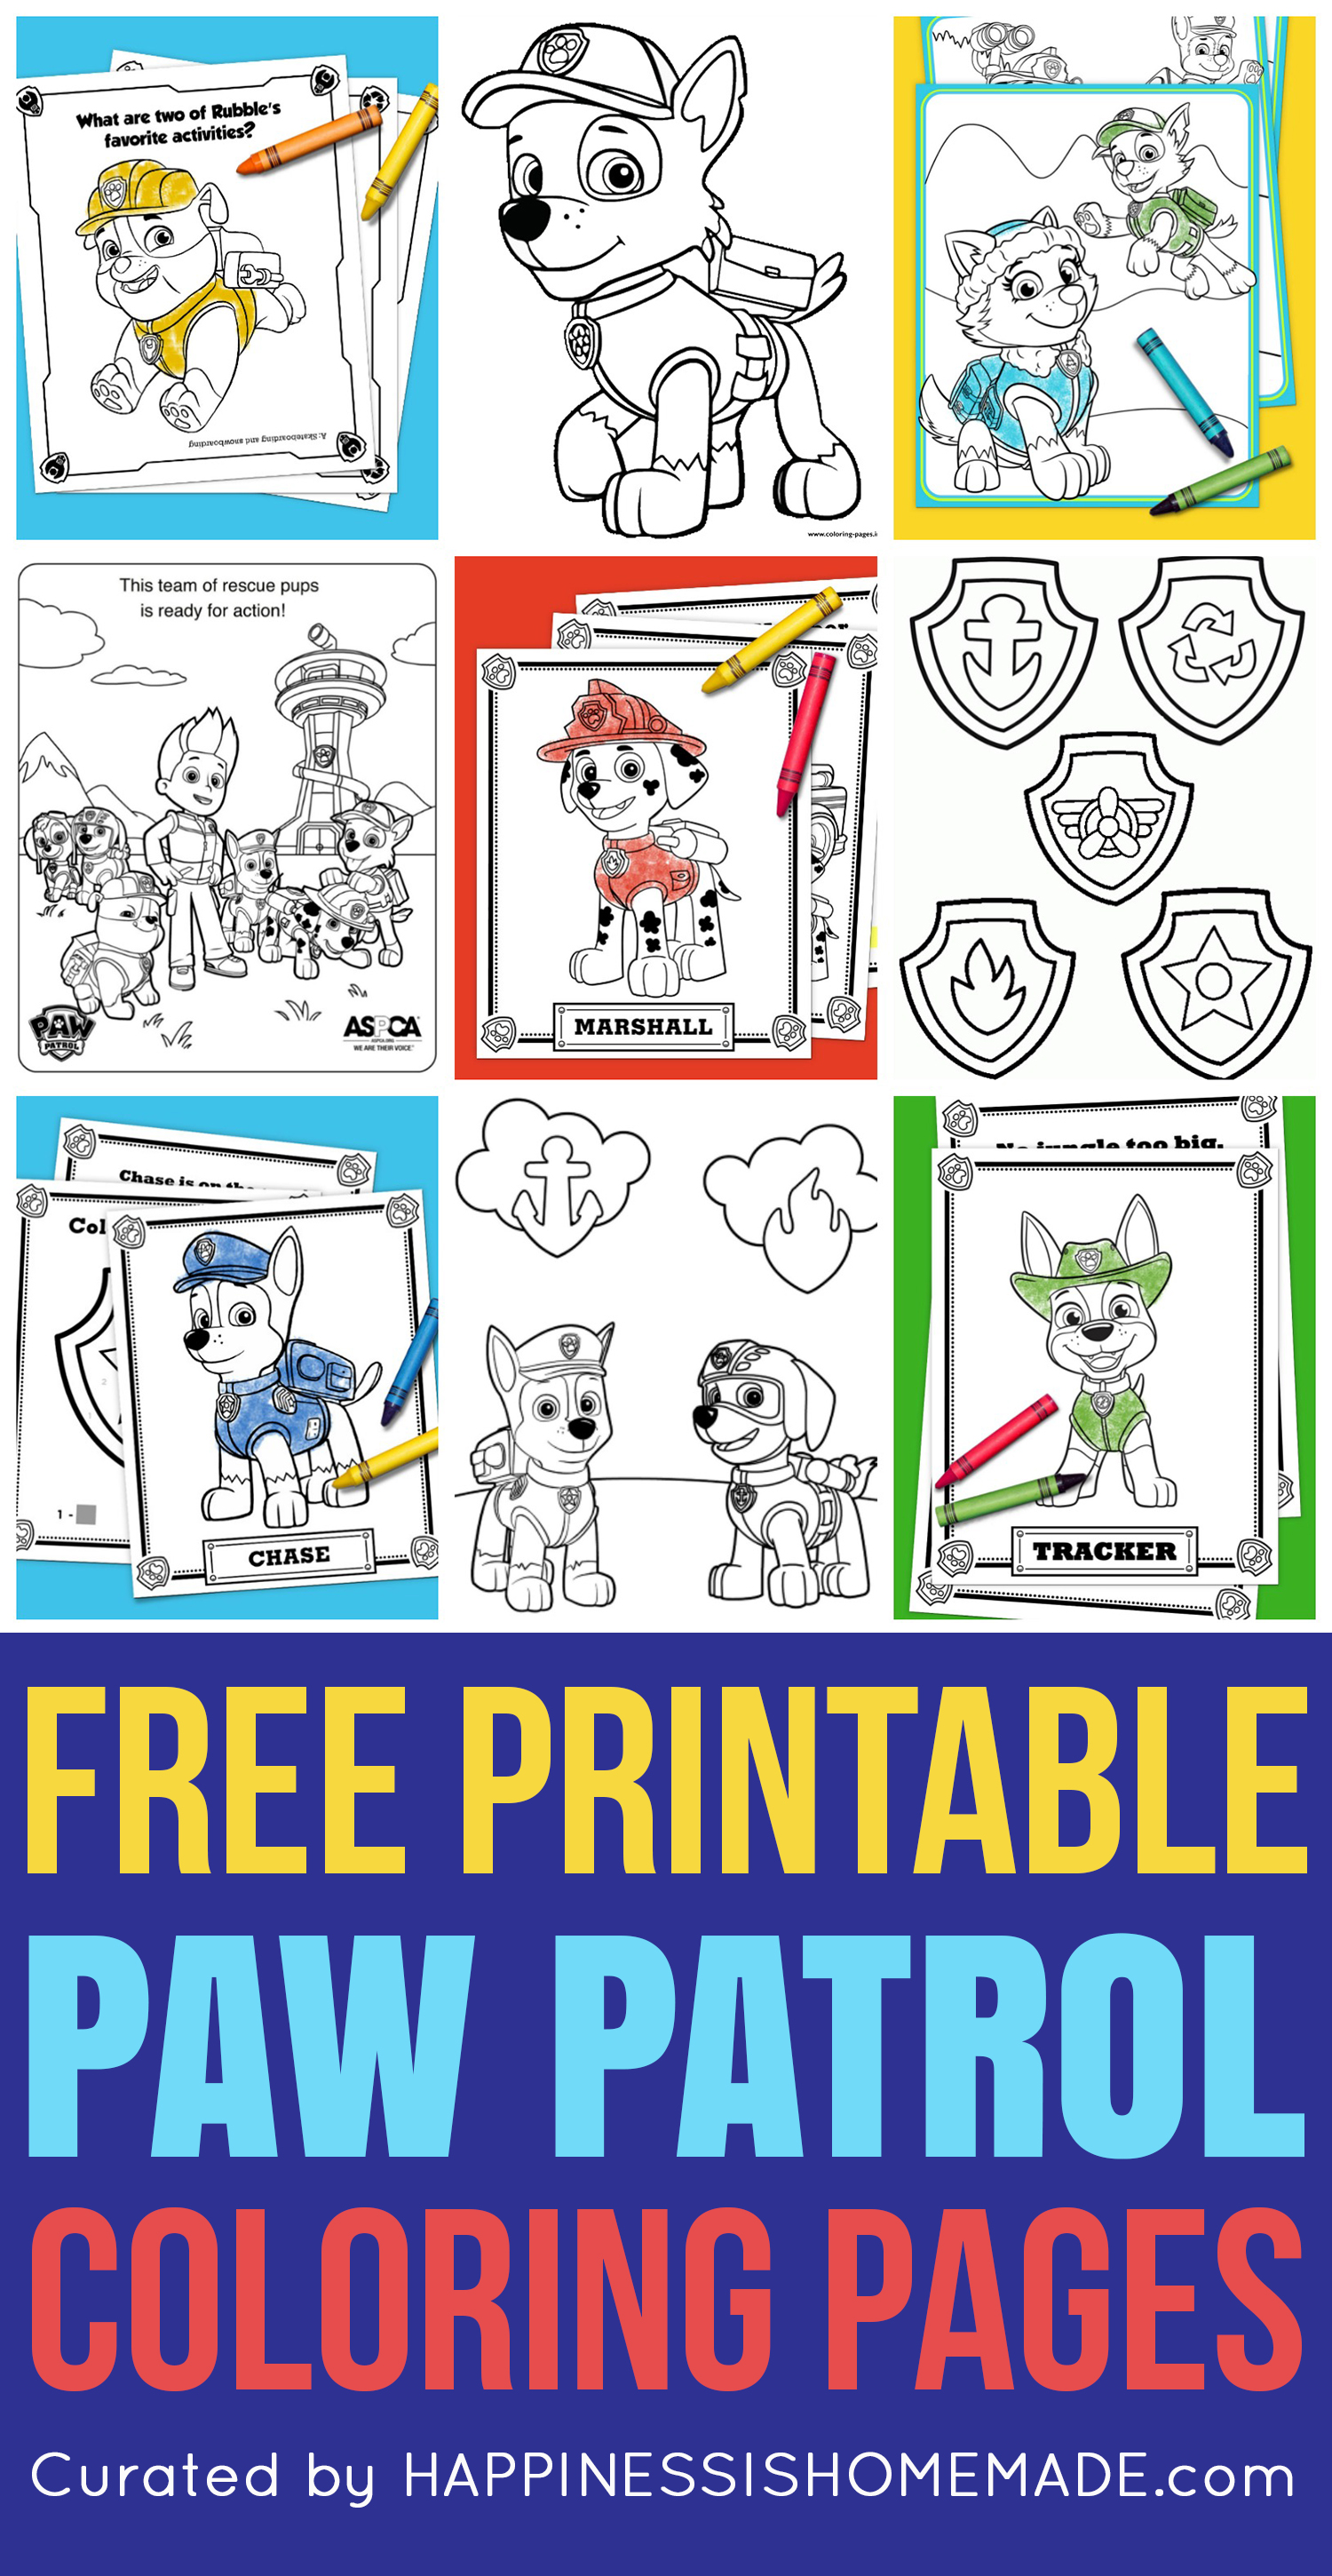 48-printable-paw-patrol-coloring-pages-skye-images-colorist